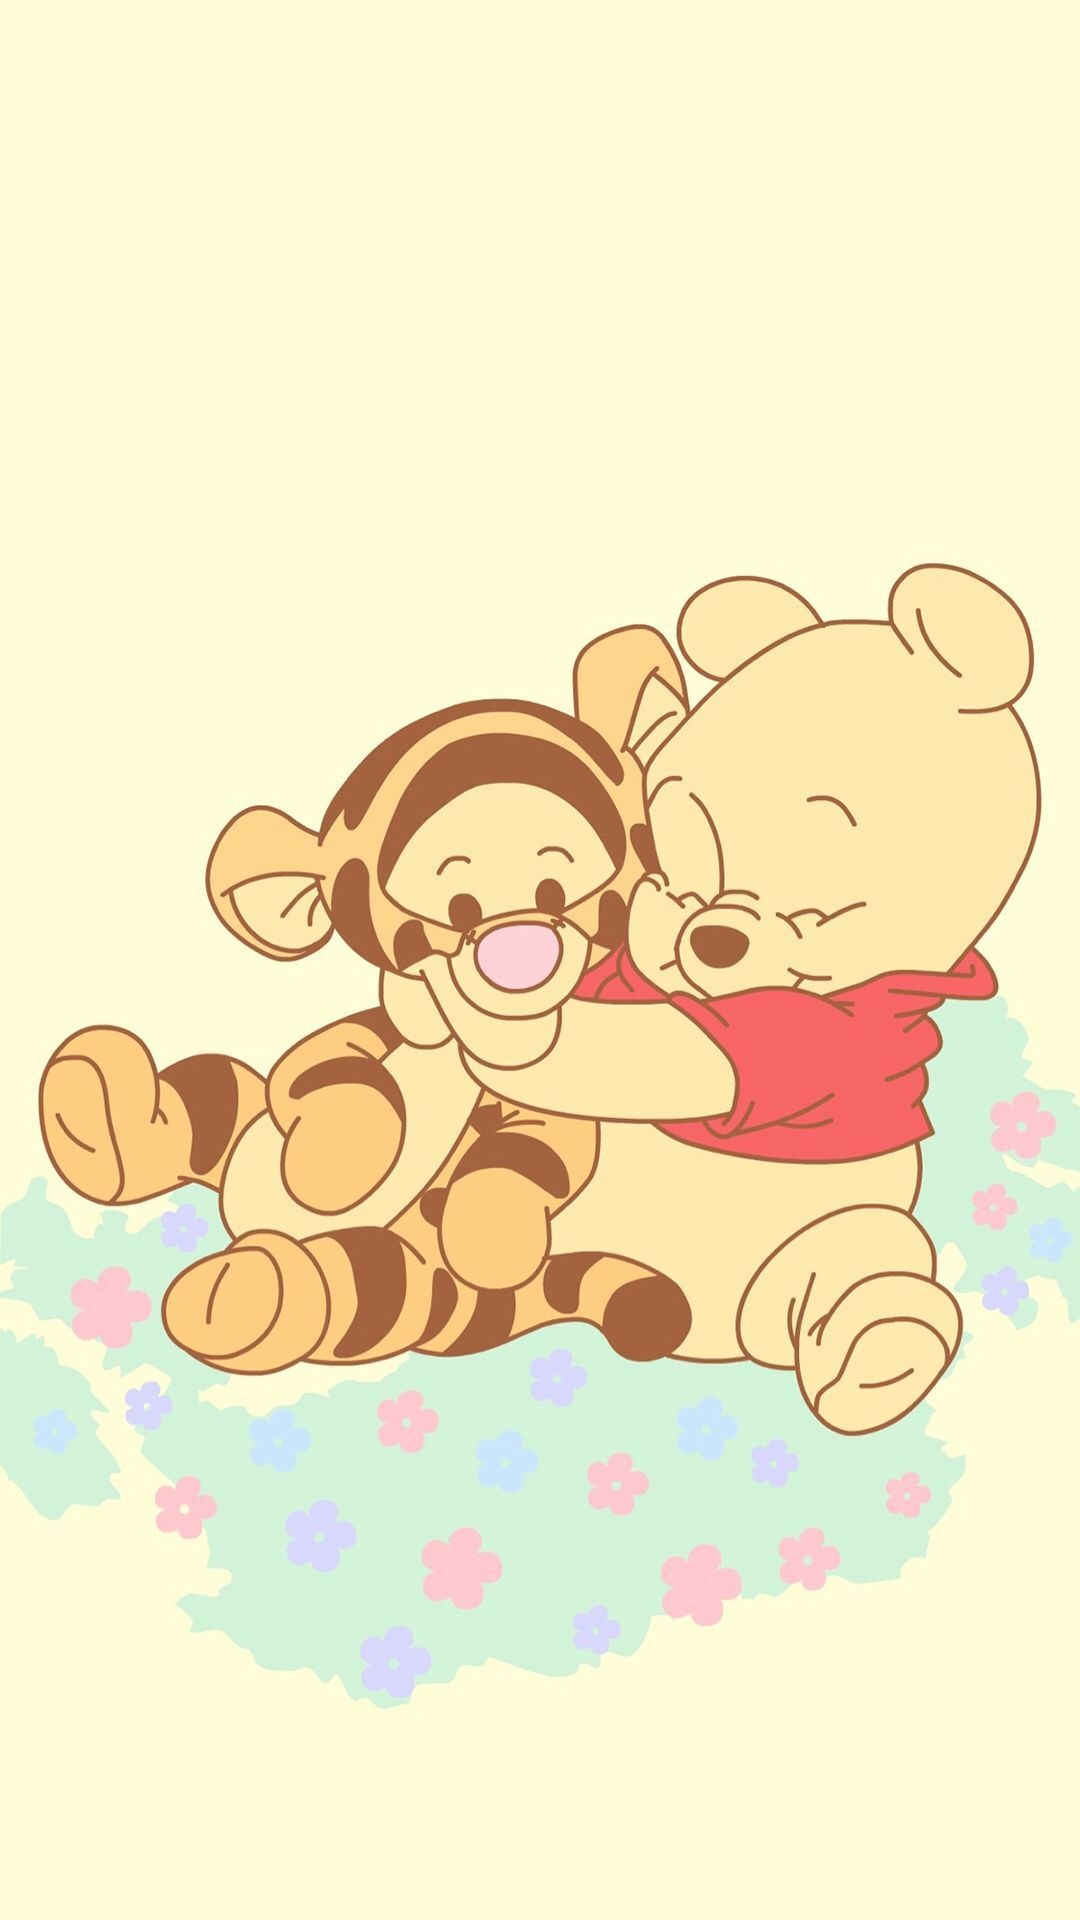 Tigger, Winnie the Pooh wallpapers, Animation, 1080x1920 Full HD Phone